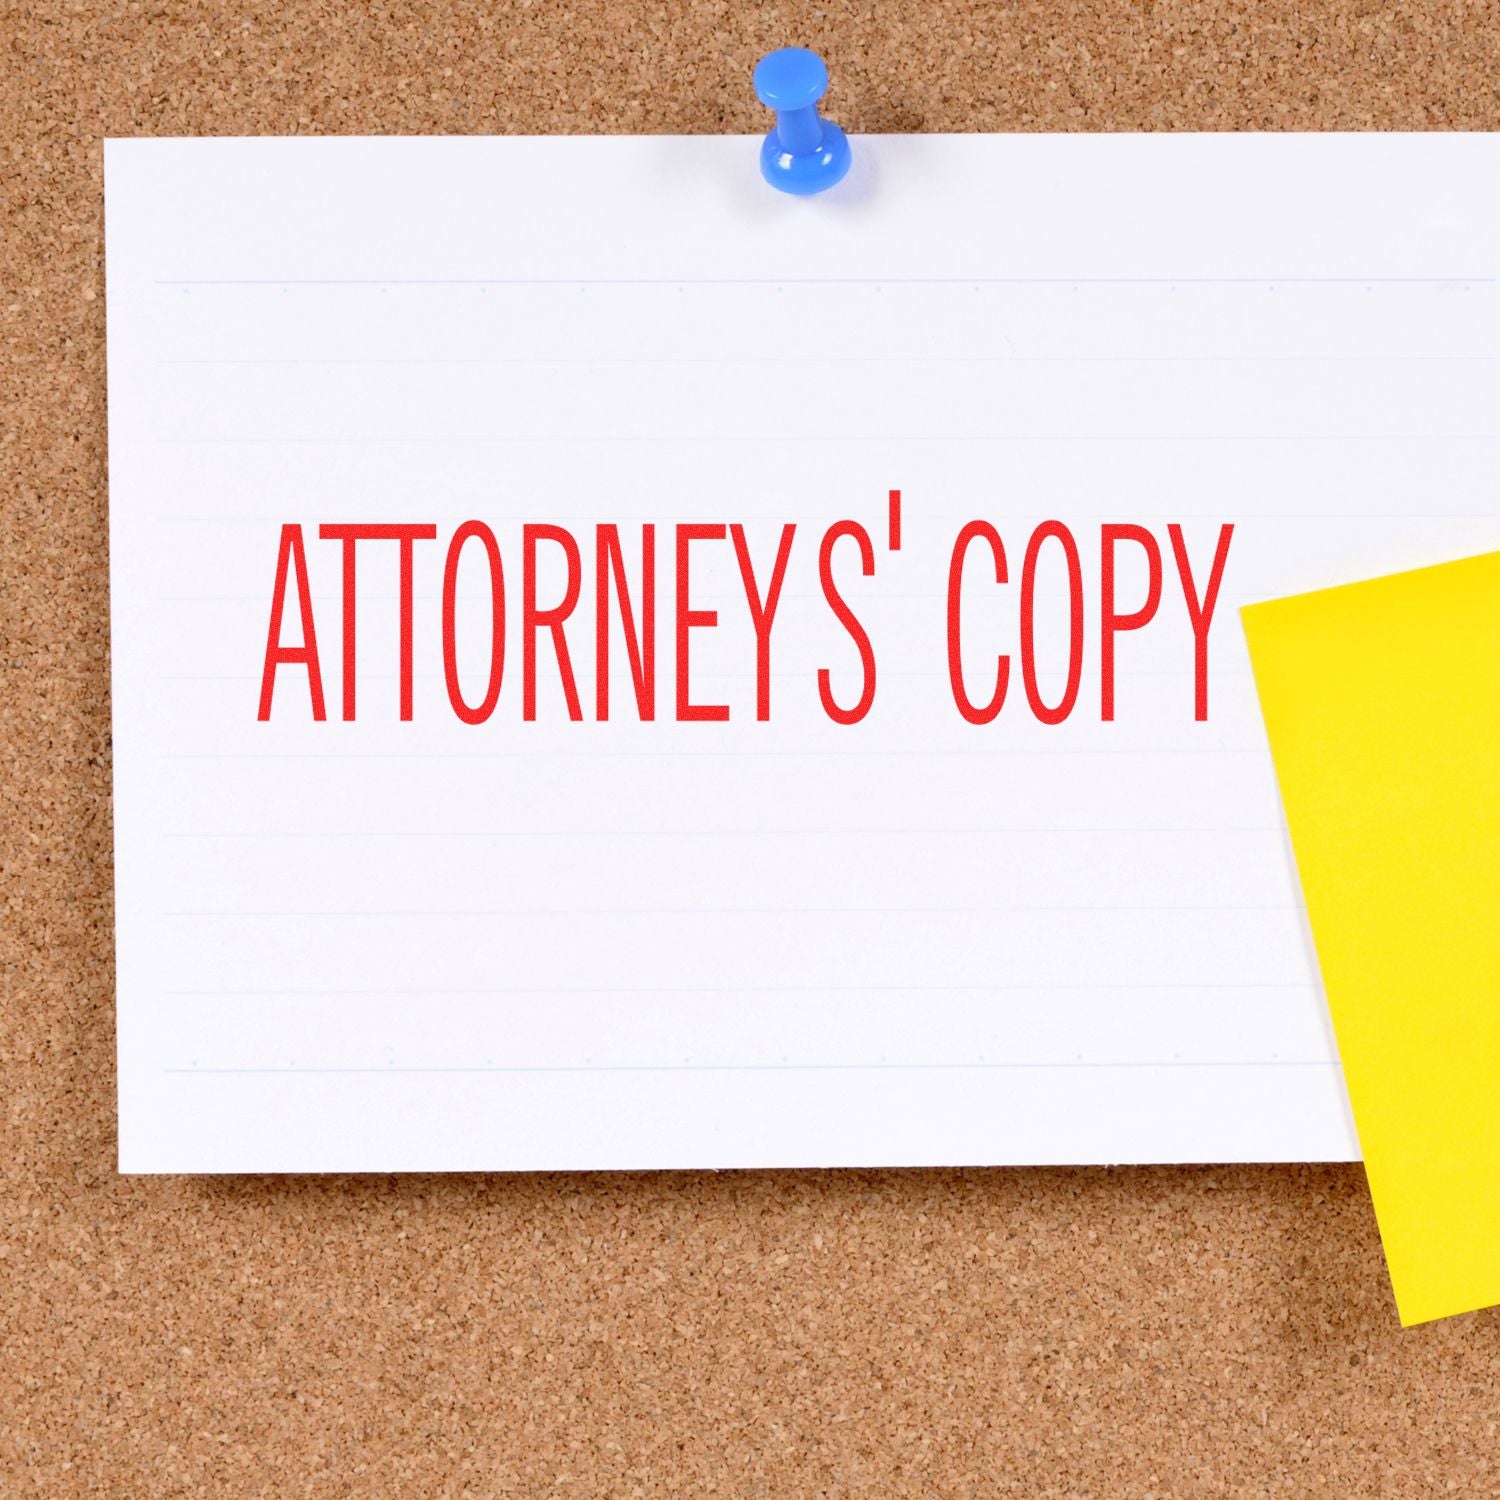 Attorneys' Copy Rubber Stamp In Use Photo